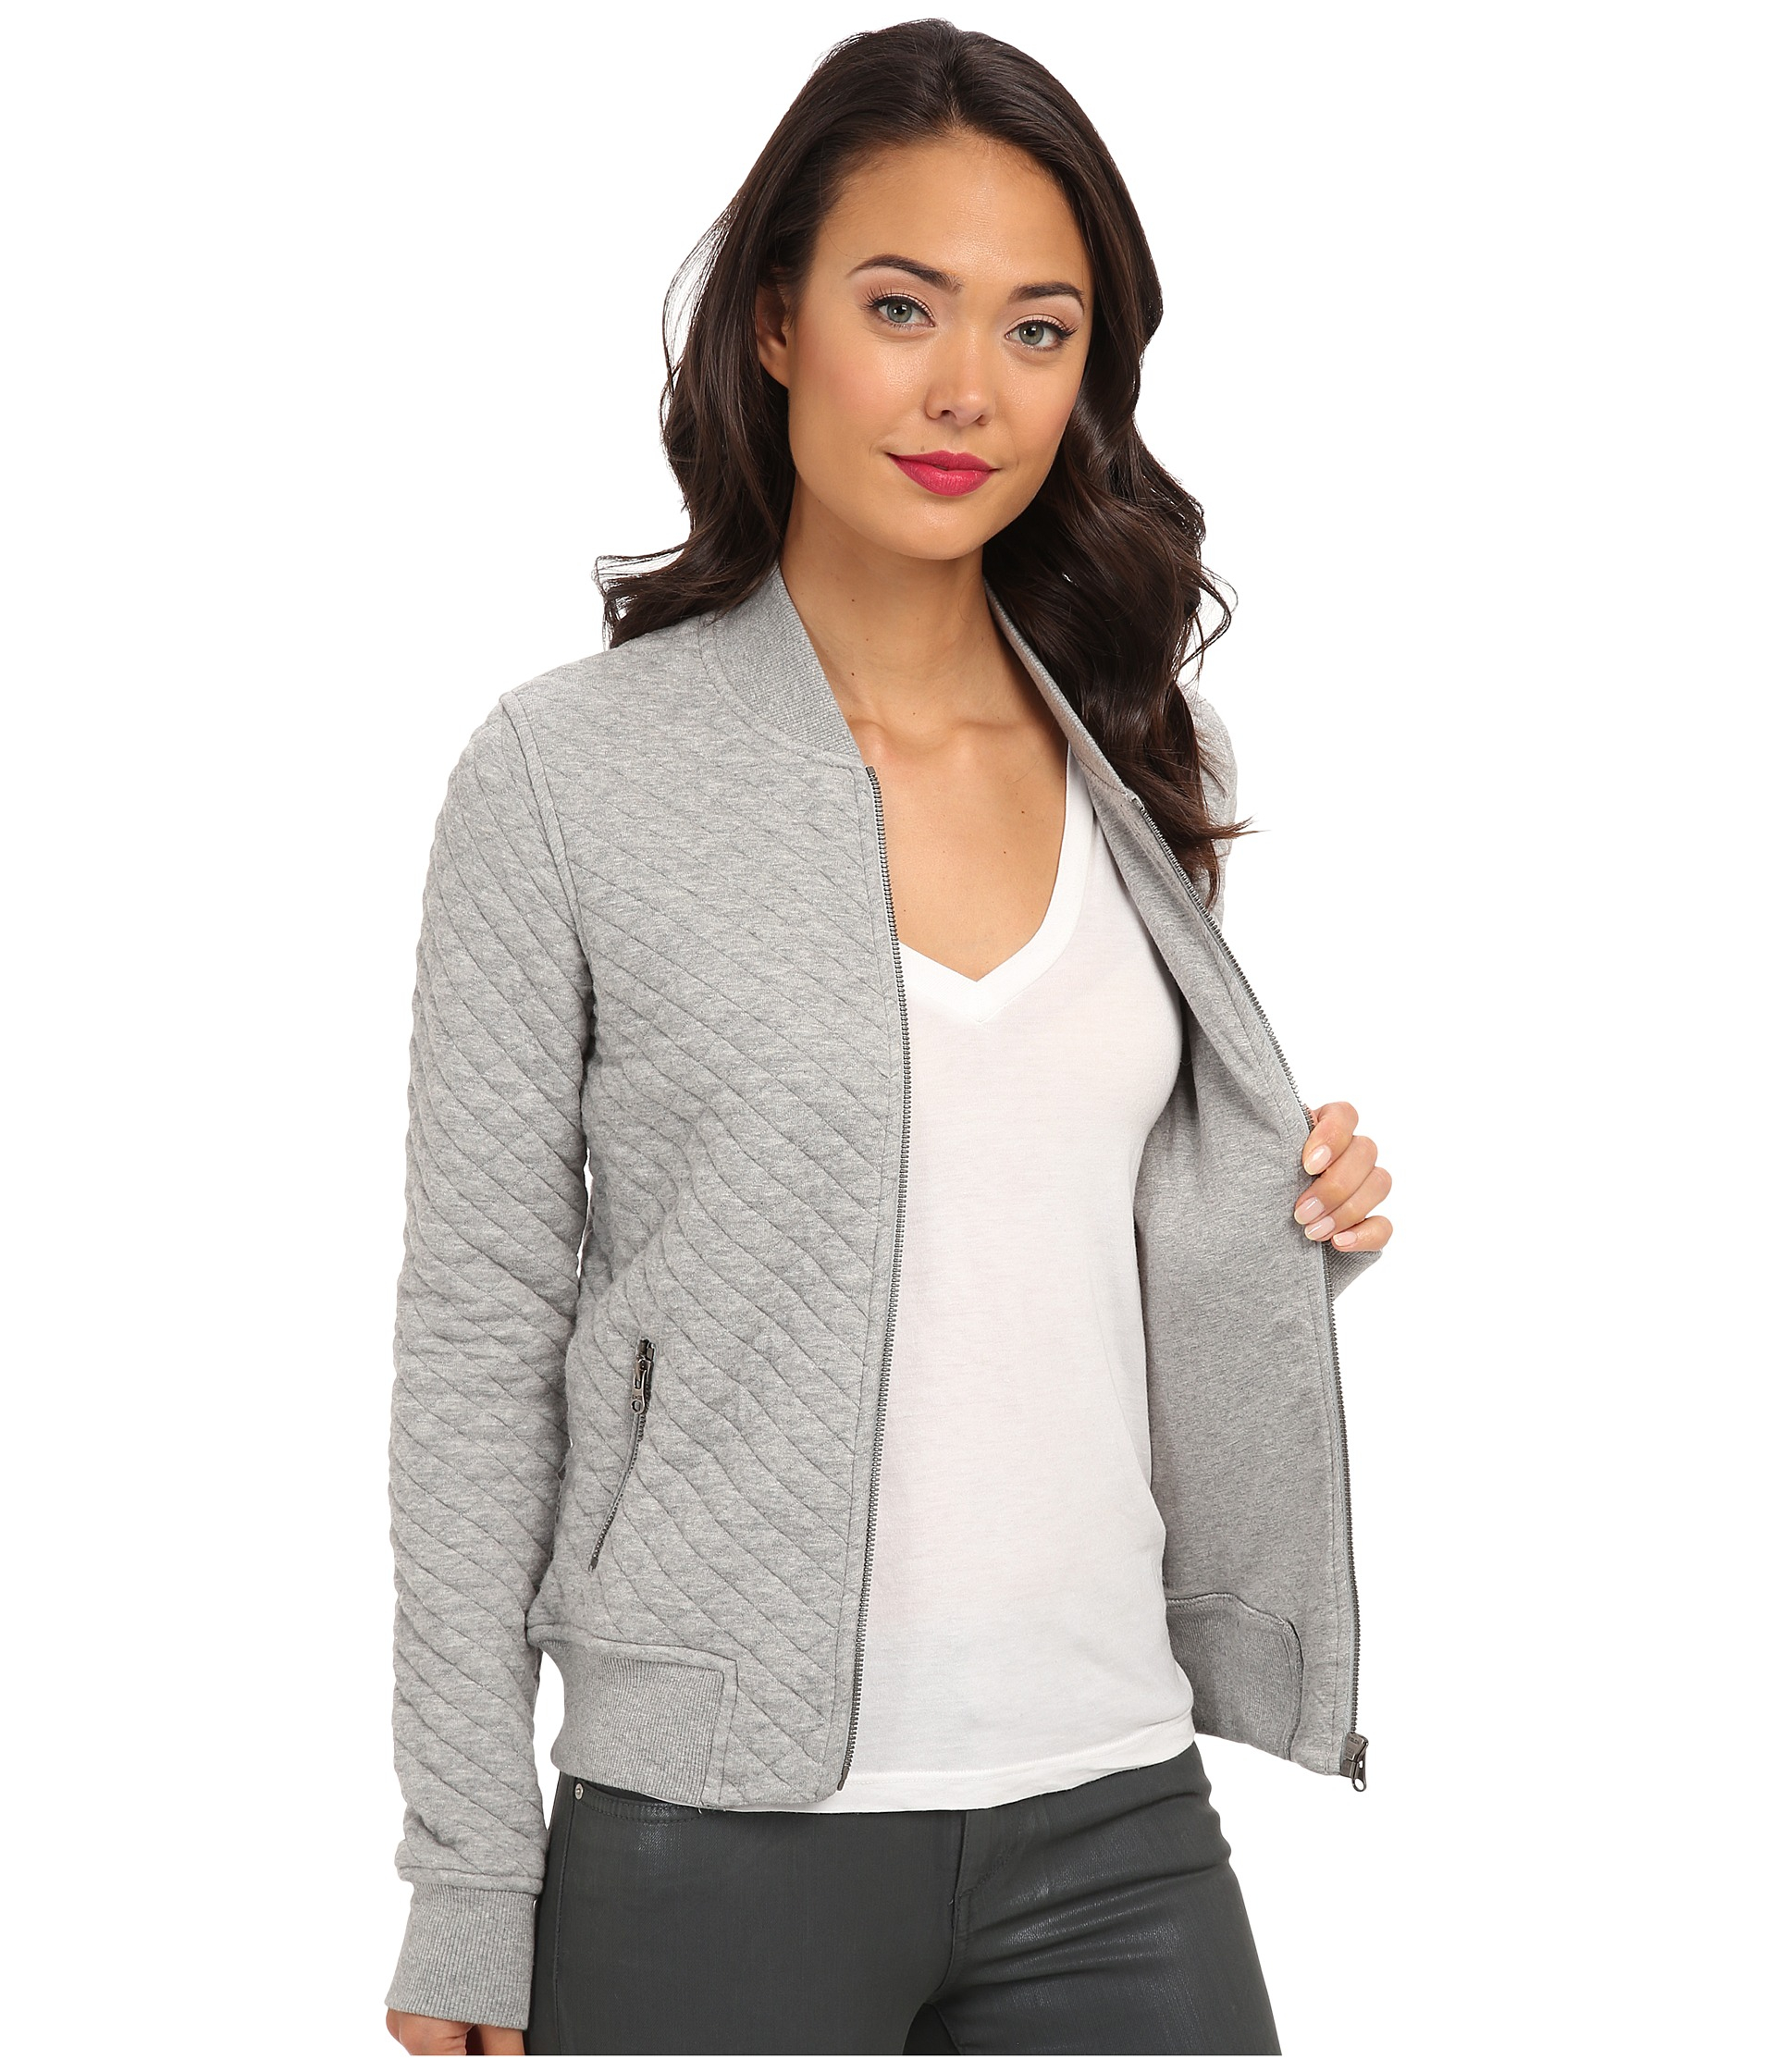 Converse Quilted Bomber Jacket in Vintage Grey Heather (Gray) - Lyst